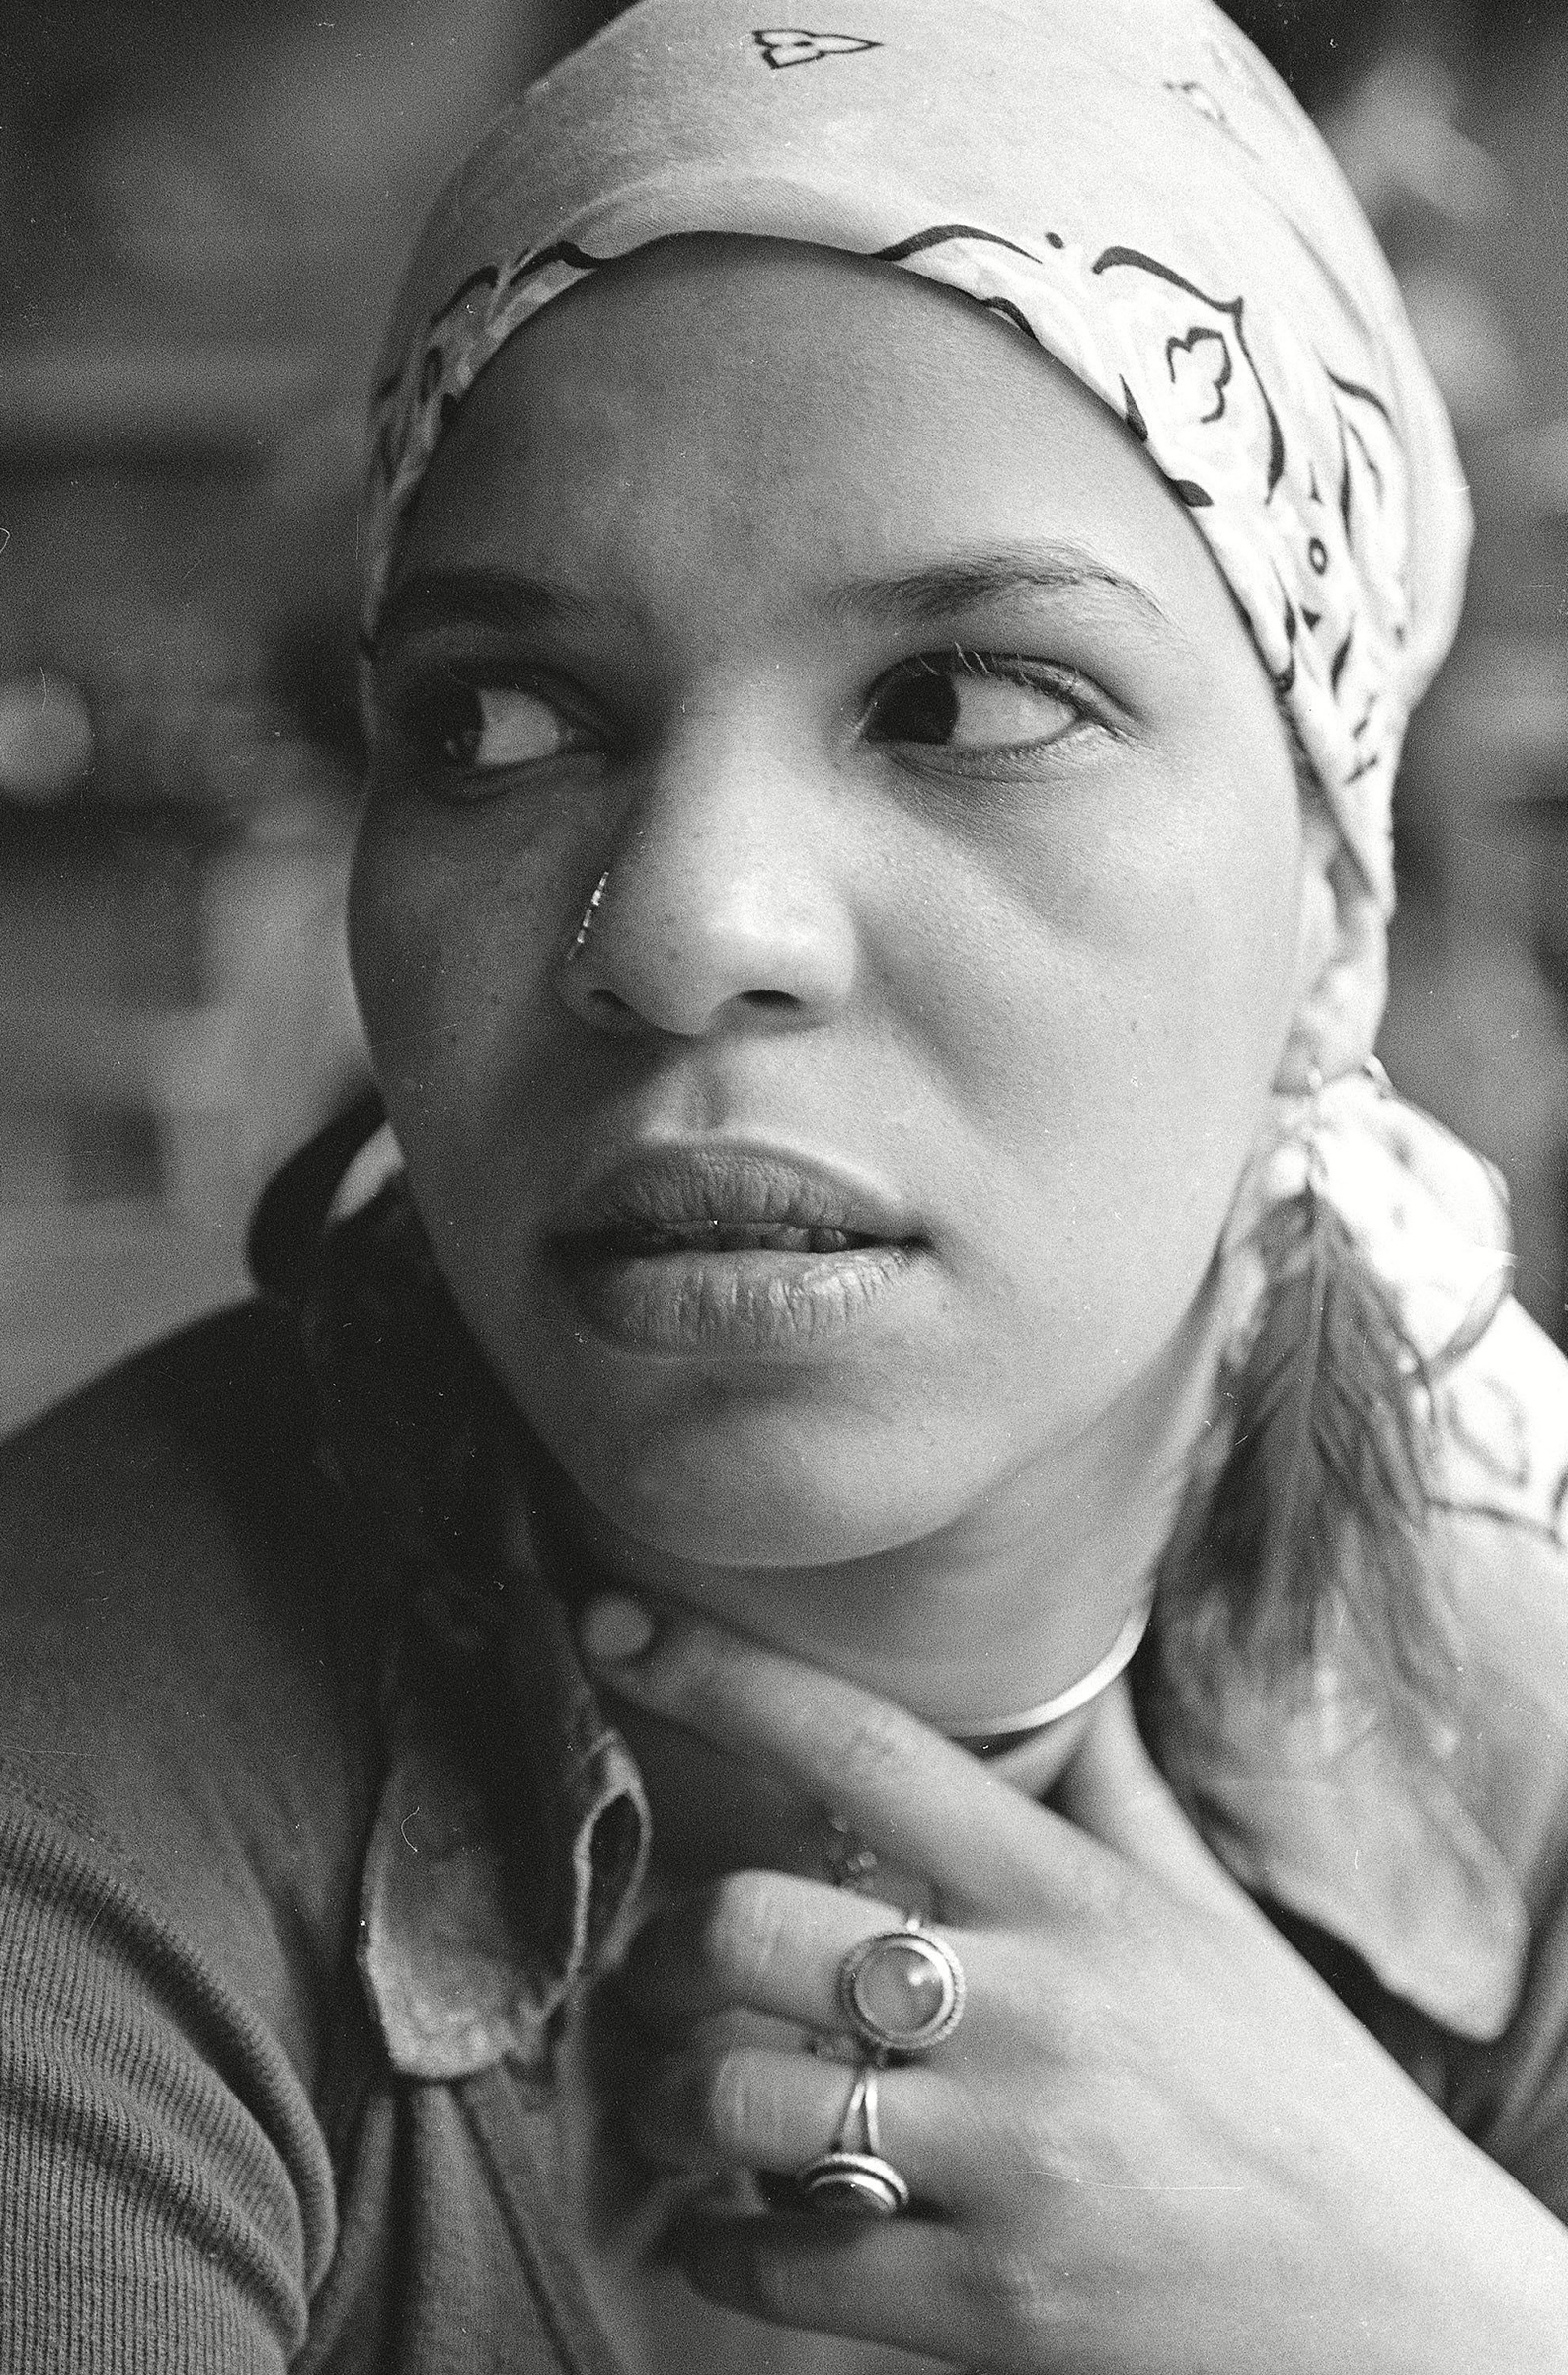 Shange in New York City in 1976, the year For Colored Girls ... premiered